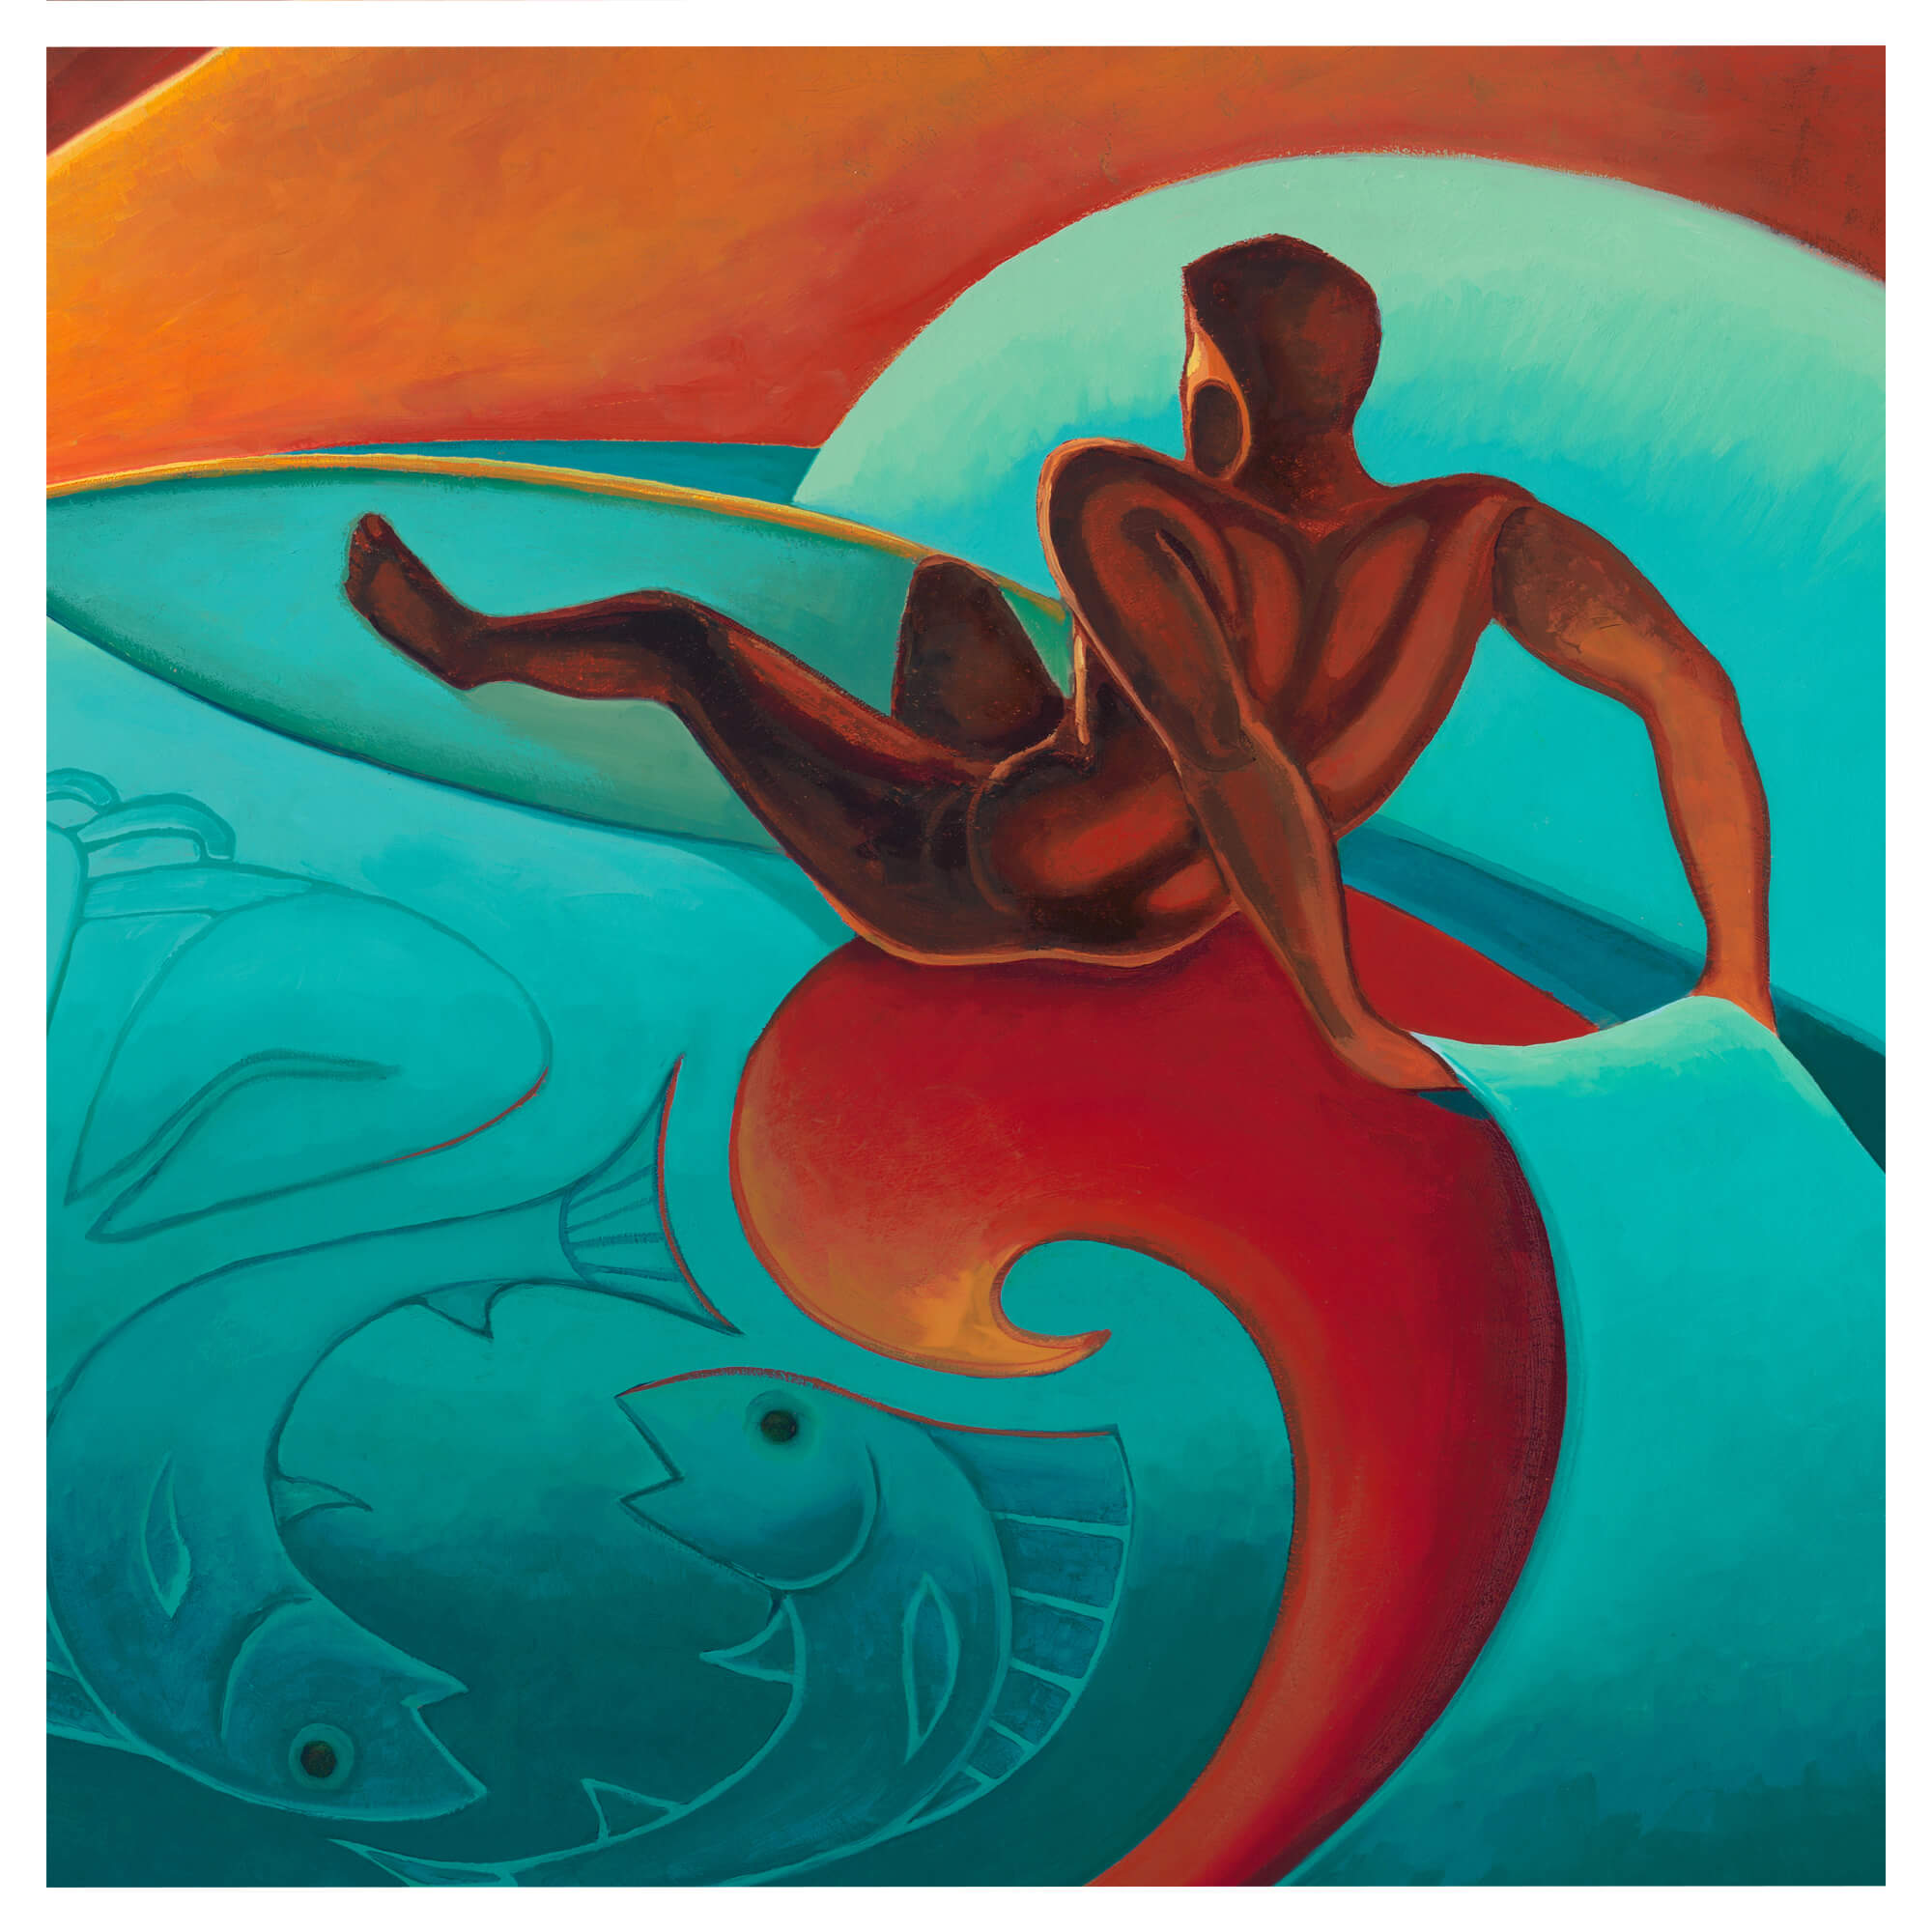 A man holding on to the wave by Hawaii artist Colin Redican